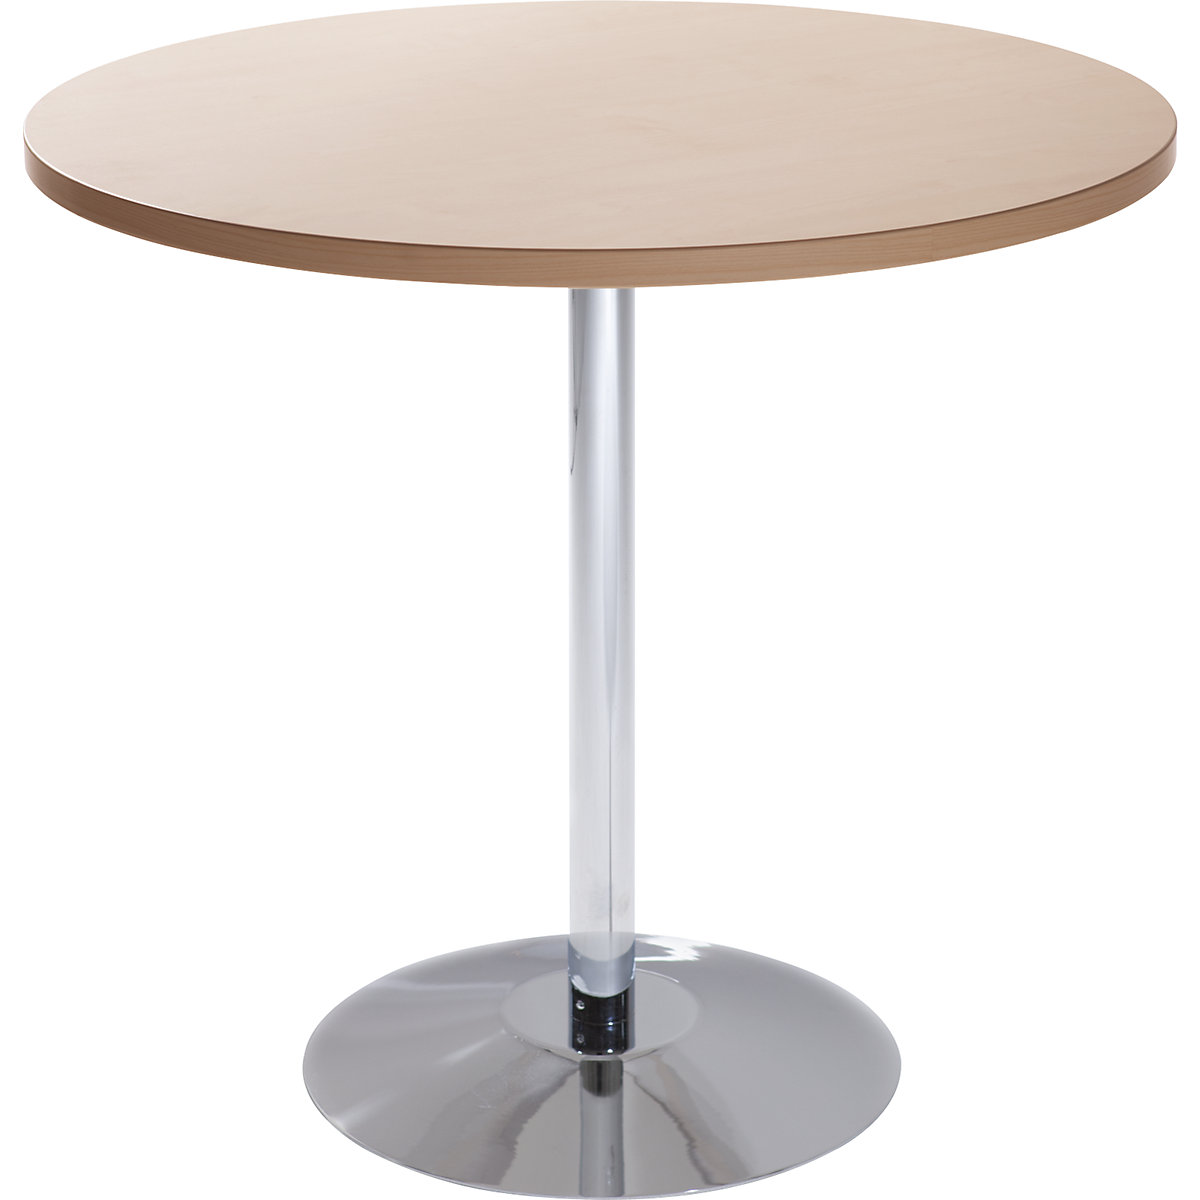 Pedestal table, Ø 800 mm, height 720 mm, beech finish moulded chipboard-5